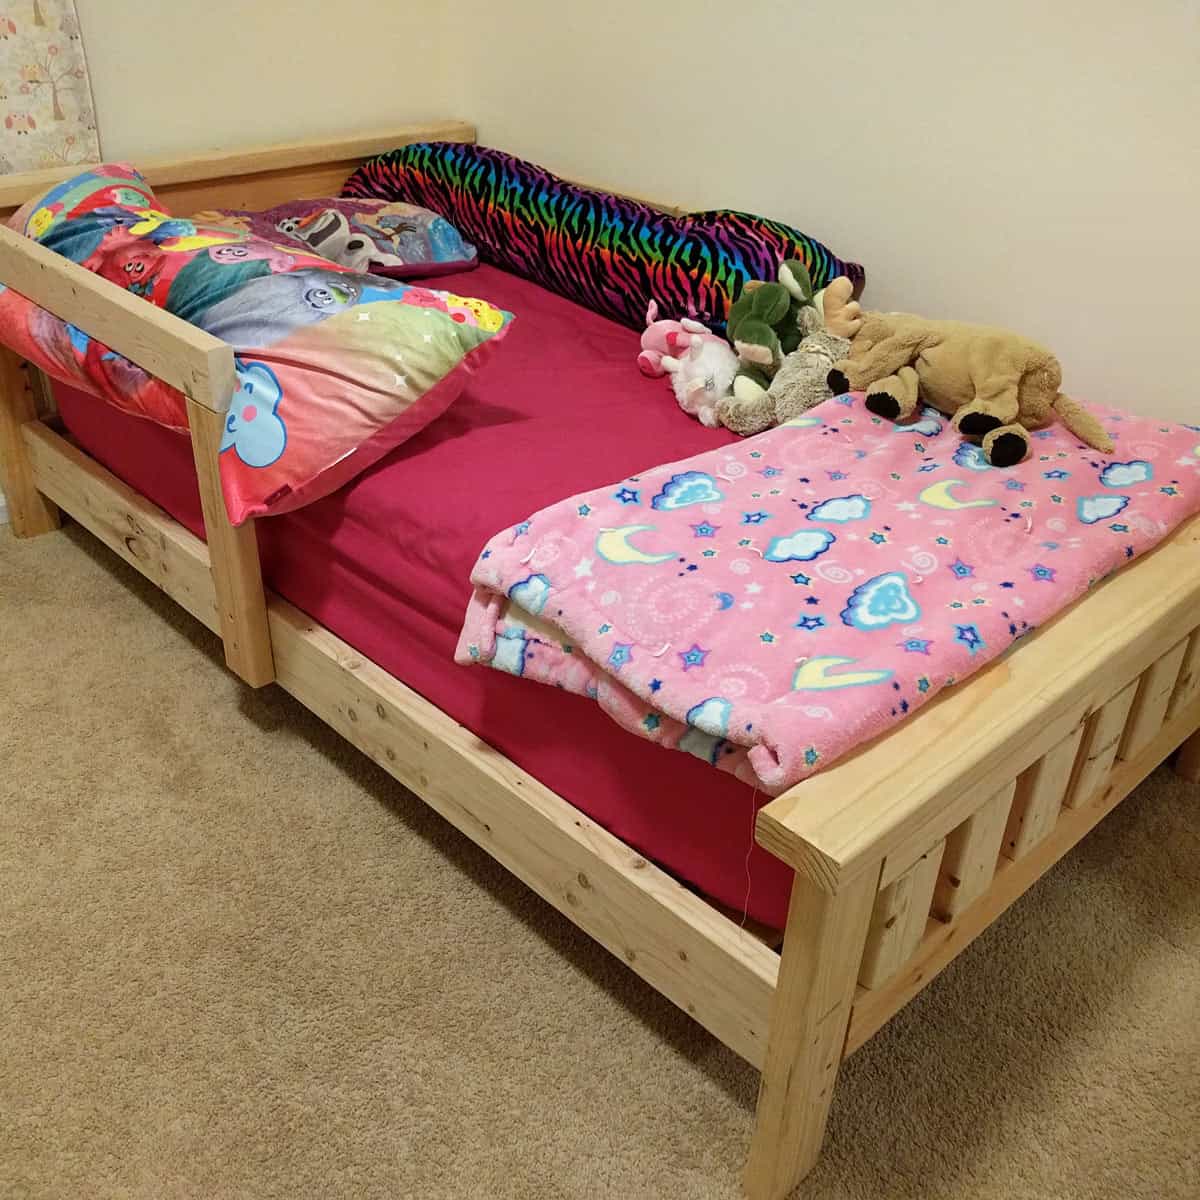 How to Build a 2x4 Twin Bed Frame